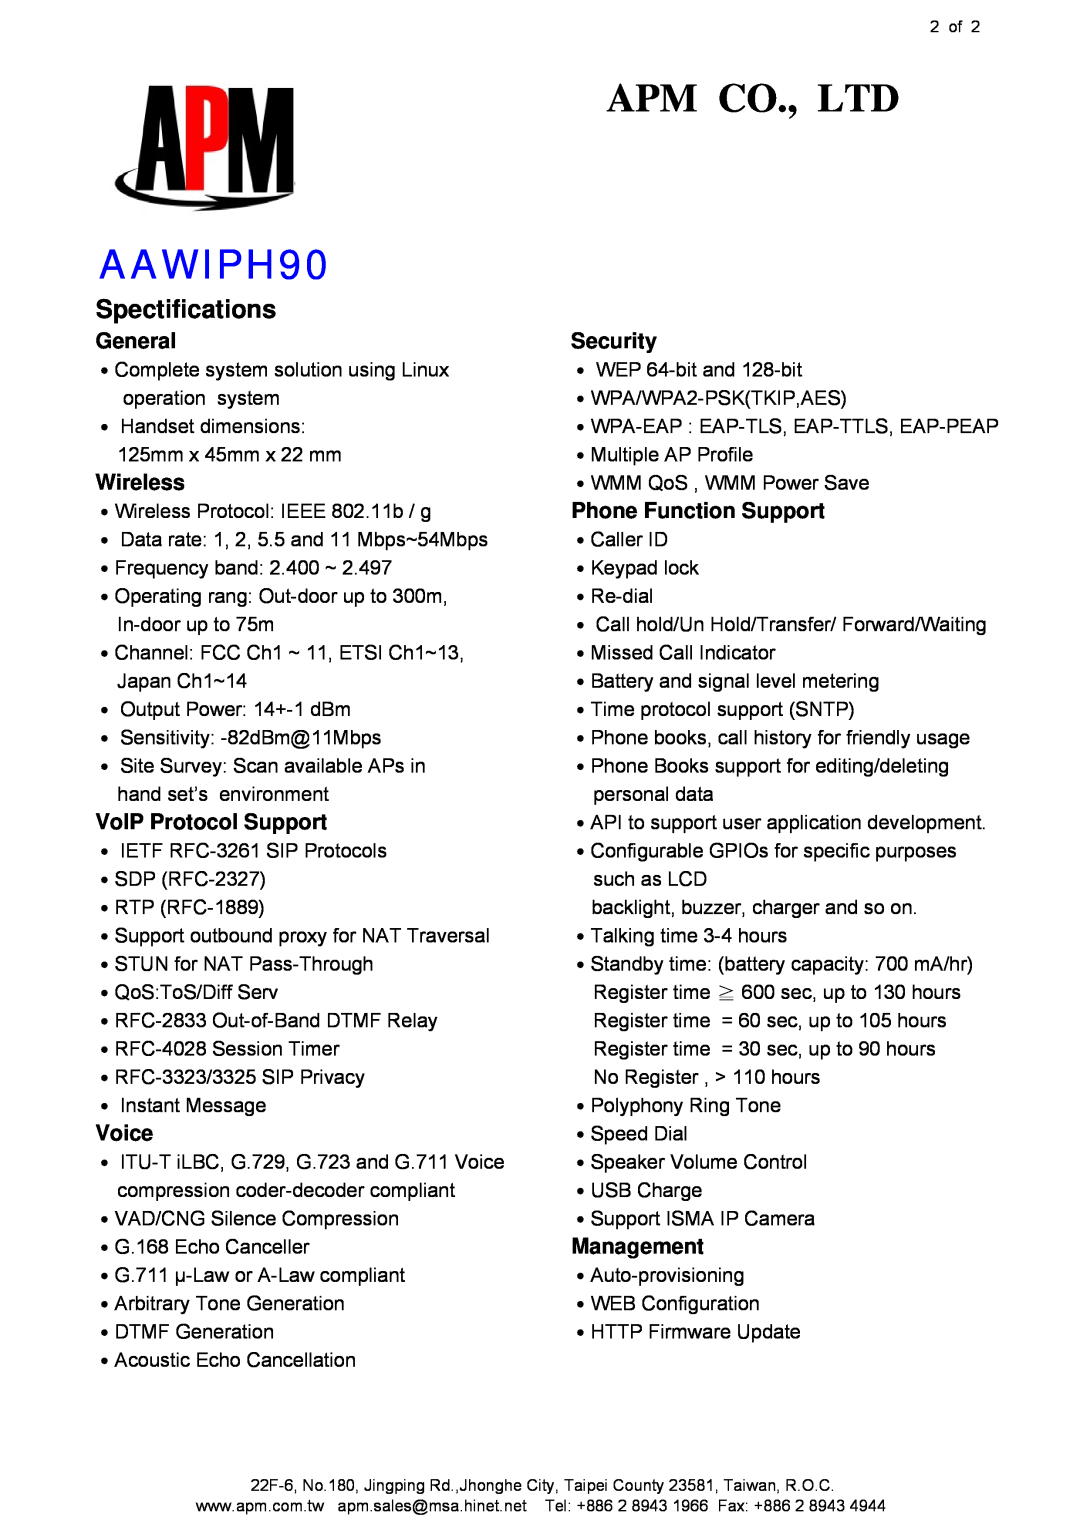 APM AAWIPH90 manual Spectifications, General, Wireless, VoIP Protocol Support, Voice, Security, Phone Function Support 